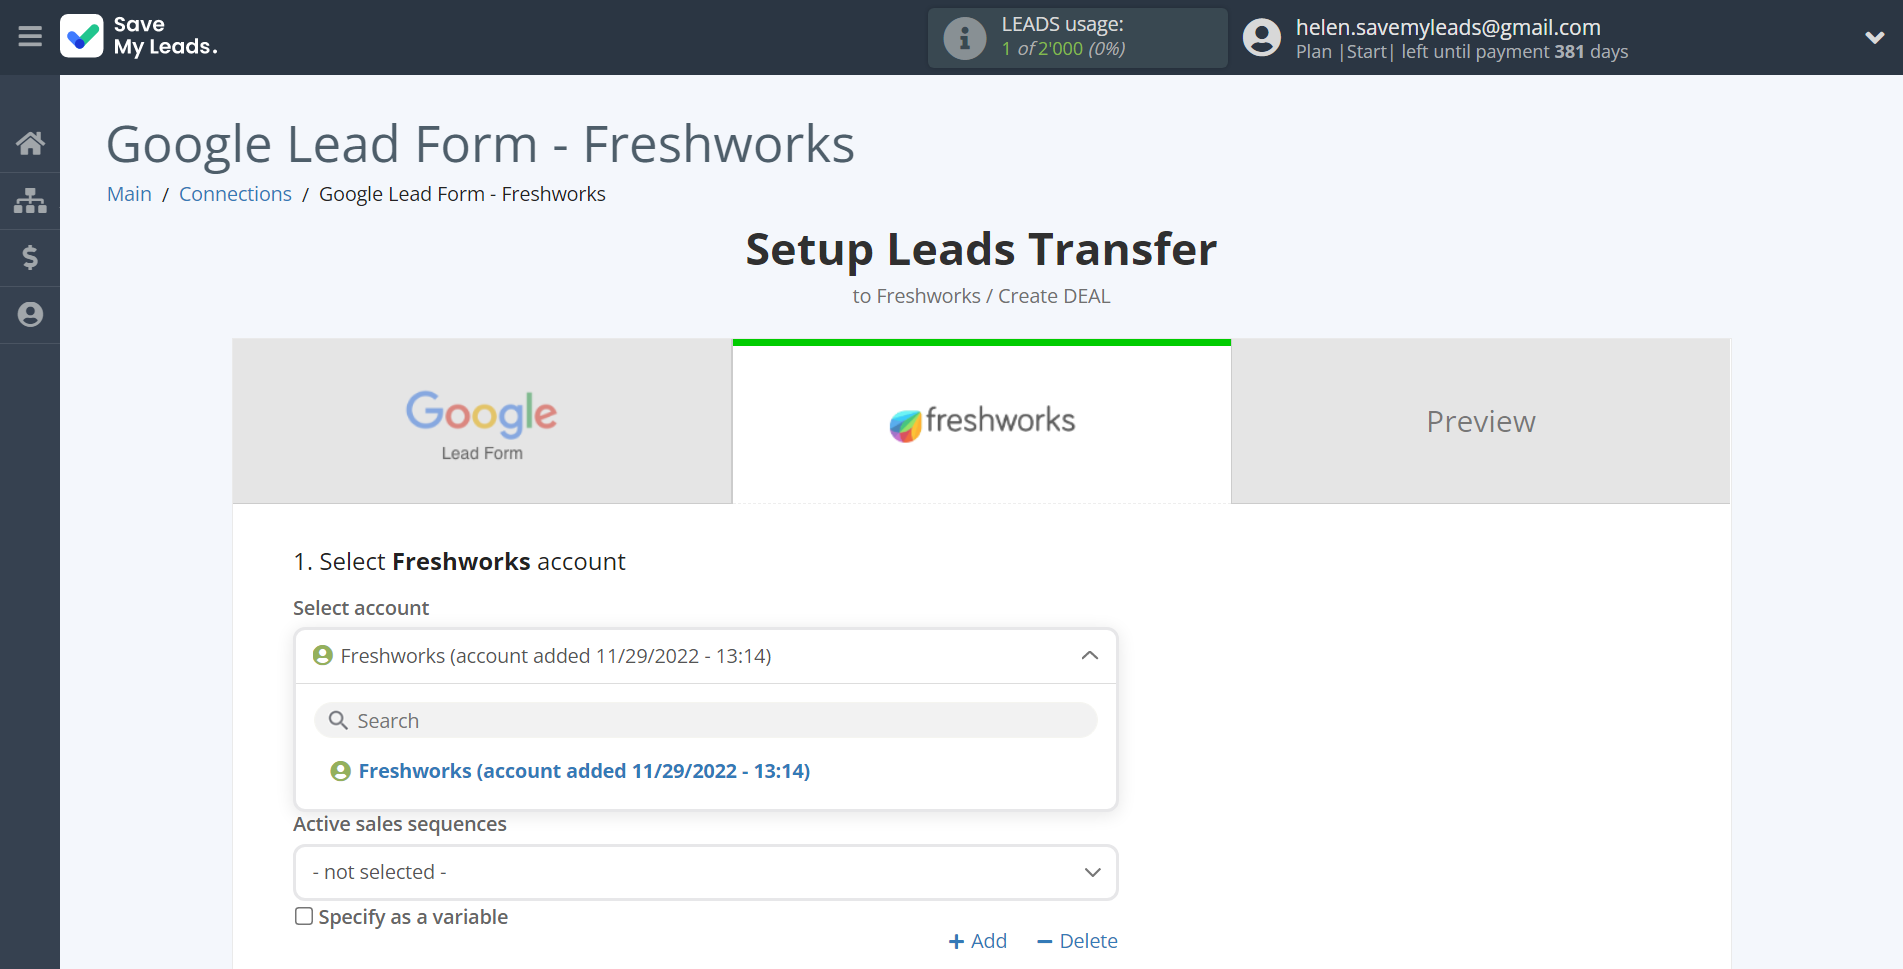 How to Connect Google Lead Form with Freshworks Create Deal | Data Destination account selection